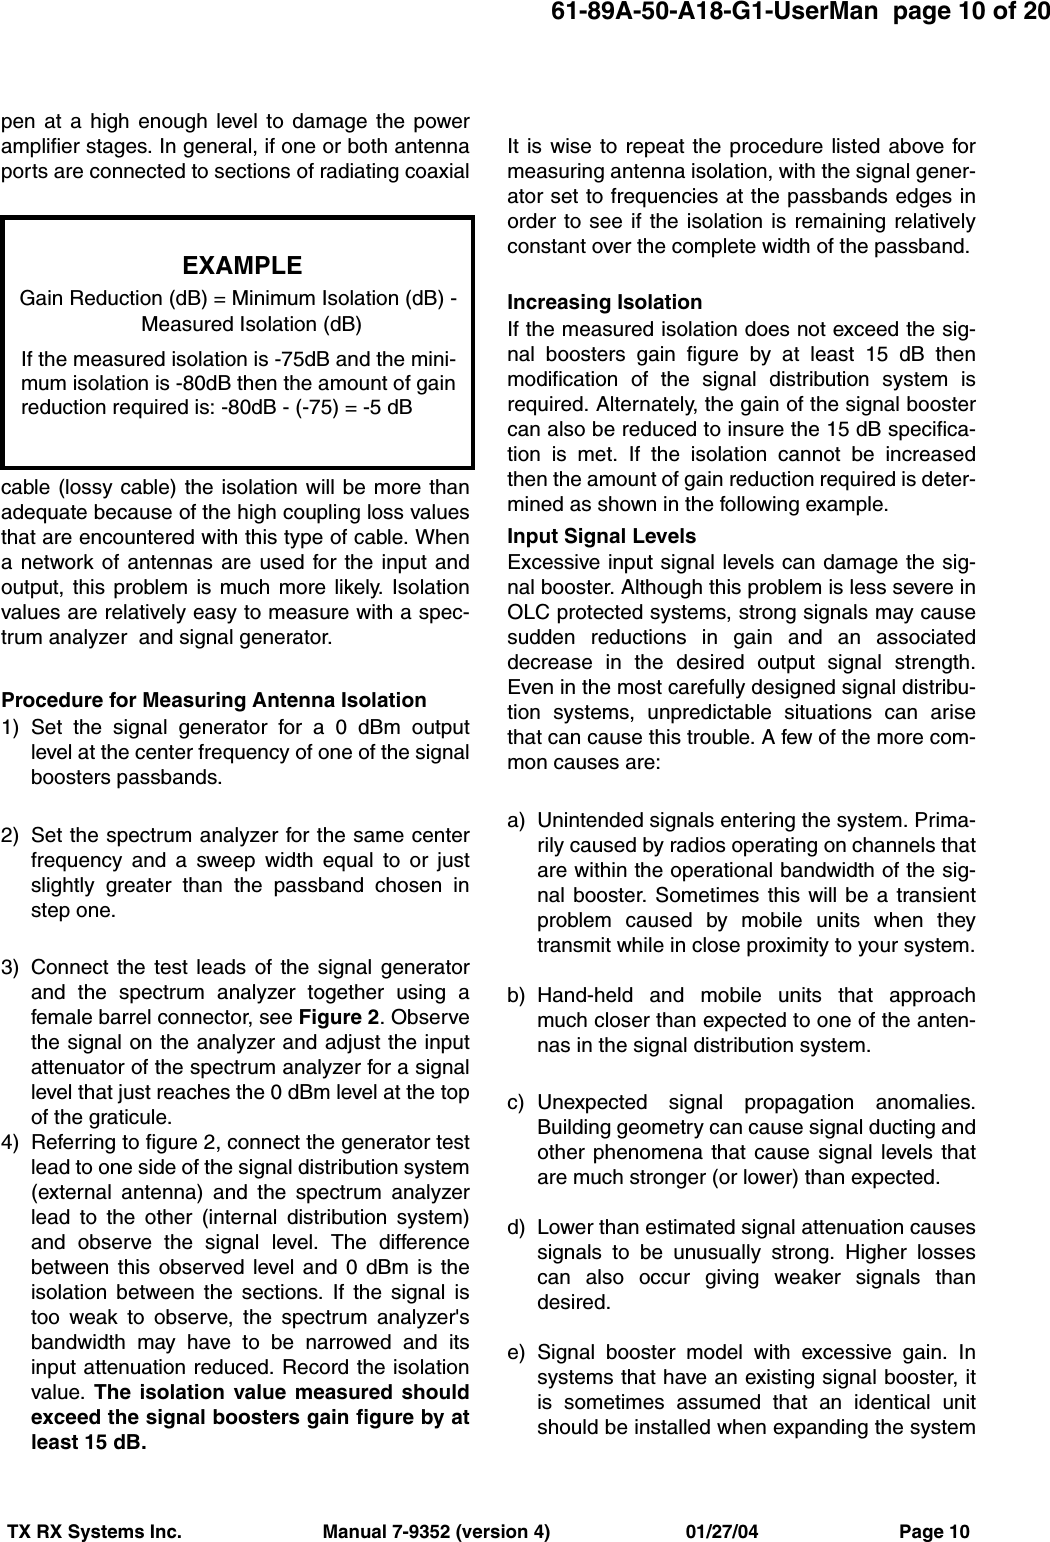 61-89A-50-A18-G1-UserMan  page 10 of 20TX RX Systems Inc.                           Manual 7-9352 (version 4)                          01/27/04                           Page 10pen at a high enough level to damage the poweramplifier stages. In general, if one or both antennaports are connected to sections of radiating coaxialcable (lossy cable) the isolation will be more thanadequate because of the high coupling loss valuesthat are encountered with this type of cable. Whena network of antennas are used for the input andoutput, this problem is much more likely. Isolationvalues are relatively easy to measure with a spec-trum analyzer  and signal generator.Procedure for Measuring Antenna Isolation1) Set the signal generator for a 0 dBm outputlevel at the center frequency of one of the signalboosters passbands.2) Set the spectrum analyzer for the same centerfrequency and a sweep width equal to or justslightly greater than the passband chosen instep one.3) Connect the test leads of the signal generatorand the spectrum analyzer together using afemale barrel connector, see Figure 2. Observethe signal on the analyzer and adjust the inputattenuator of the spectrum analyzer for a signallevel that just reaches the 0 dBm level at the topof the graticule. 4) Referring to figure 2, connect the generator testlead to one side of the signal distribution system(external antenna) and the spectrum analyzerlead to the other (internal distribution system)and observe the signal level. The differencebetween this observed level and 0 dBm is theisolation between the sections. If the signal istoo weak to observe, the spectrum analyzer&apos;sbandwidth may have to be narrowed and itsinput attenuation reduced. Record the isolationvalue. The isolation value measured shouldexceed the signal boosters gain figure by atleast 15 dB.It is wise to repeat the procedure listed above formeasuring antenna isolation, with the signal gener-ator set to frequencies at the passbands edges inorder to see if the isolation is remaining relativelyconstant over the complete width of the passband.Increasing Isolation  If the measured isolation does not exceed the sig-nal boosters gain figure by at least 15 dB thenmodification of the signal distribution system isrequired. Alternately, the gain of the signal boostercan also be reduced to insure the 15 dB specifica-tion is met. If the isolation cannot be increasedthen the amount of gain reduction required is deter-mined as shown in the following example.Input Signal LevelsExcessive input signal levels can damage the sig-nal booster. Although this problem is less severe inOLC protected systems, strong signals may causesudden reductions in gain and an associateddecrease in the desired output signal strength.Even in the most carefully designed signal distribu-tion systems, unpredictable situations can arisethat can cause this trouble. A few of the more com-mon causes are:a) Unintended signals entering the system. Prima-rily caused by radios operating on channels thatare within the operational bandwidth of the sig-nal booster. Sometimes this will be a transientproblem caused by mobile units when theytransmit while in close proximity to your system.b) Hand-held and mobile units that approachmuch closer than expected to one of the anten-nas in the signal distribution system.c) Unexpected signal propagation anomalies.Building geometry can cause signal ducting andother phenomena that cause signal levels thatare much stronger (or lower) than expected.d) Lower than estimated signal attenuation causessignals to be unusually strong. Higher lossescan also occur giving weaker signals thandesired.e) Signal booster model with excessive gain. Insystems that have an existing signal booster, itis sometimes assumed that an identical unitshould be installed when expanding the systemEXAMPLEGain Reduction (dB) = Minimum Isolation (dB) - Measured Isolation (dB)If the measured isolation is -75dB and the mini-mum isolation is -80dB then the amount of gainreduction required is: -80dB - (-75) = -5 dB